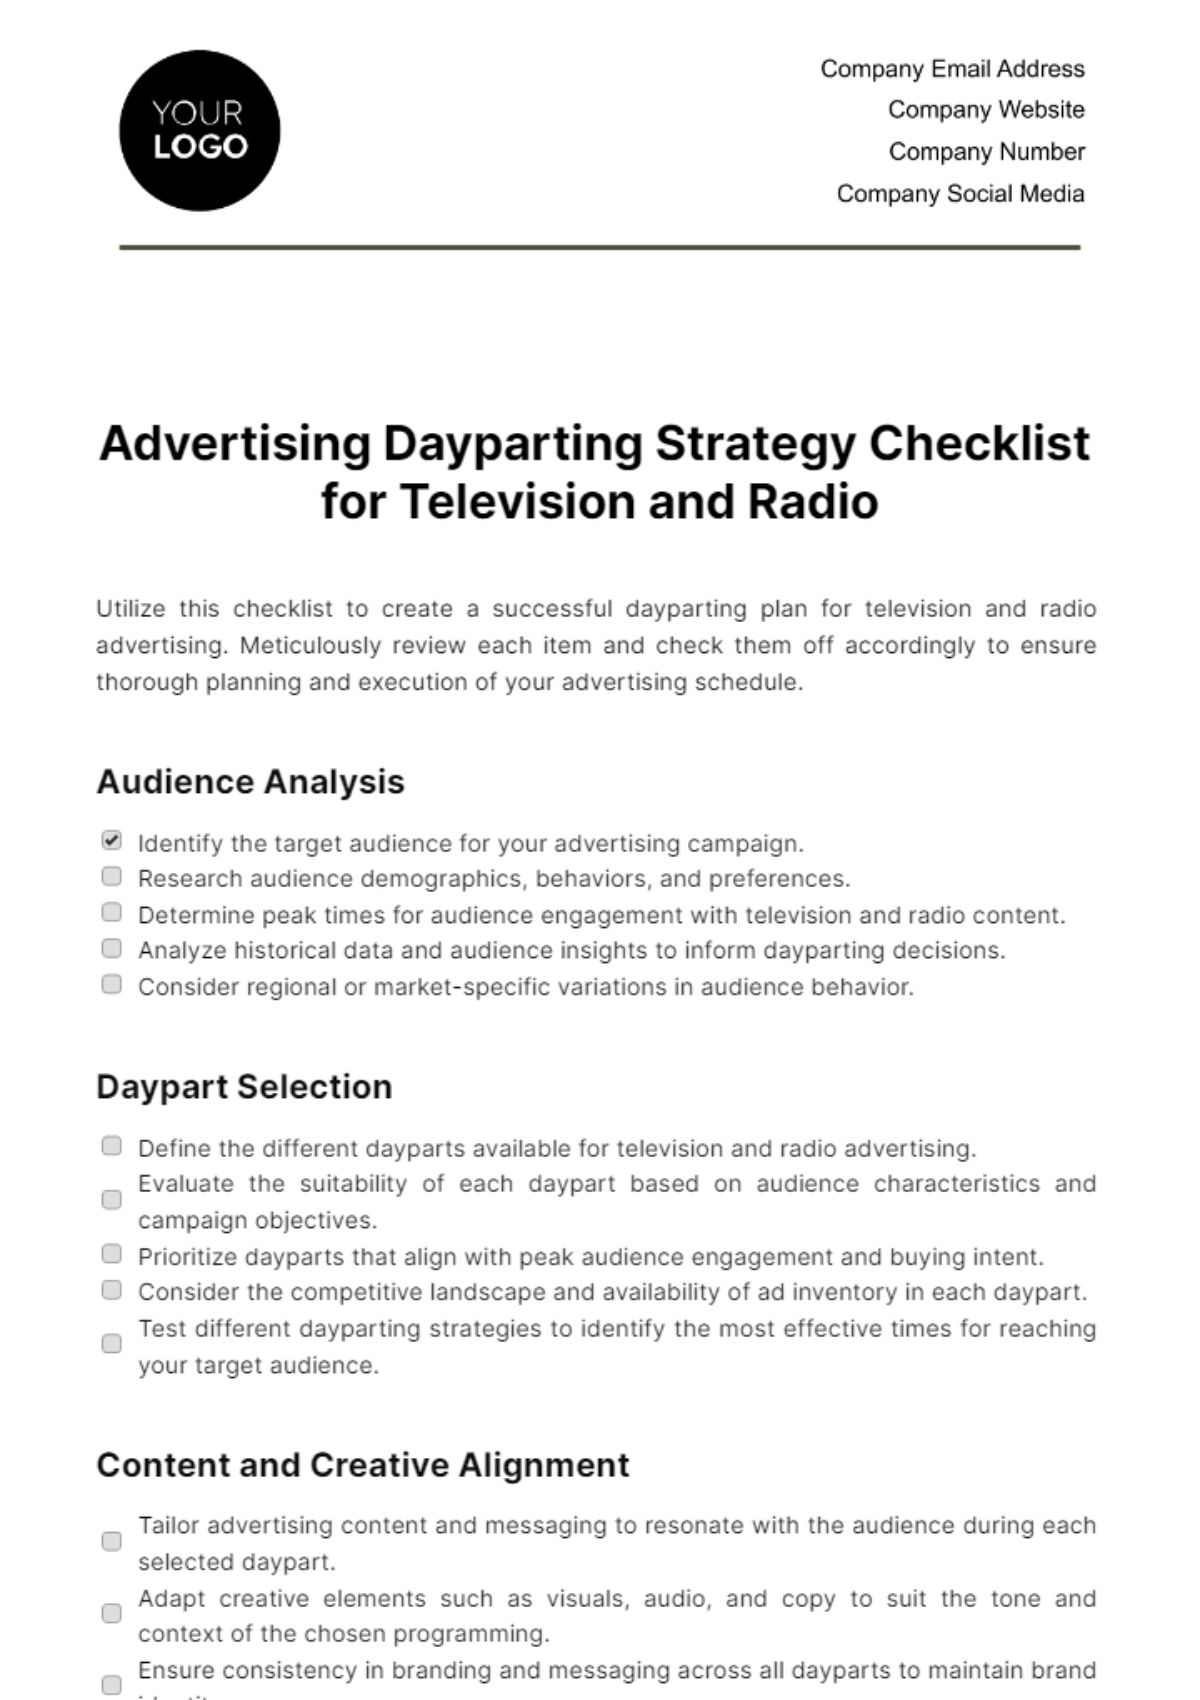 Free Advertising Dayparting Strategy Checklist for Television and Radio Template